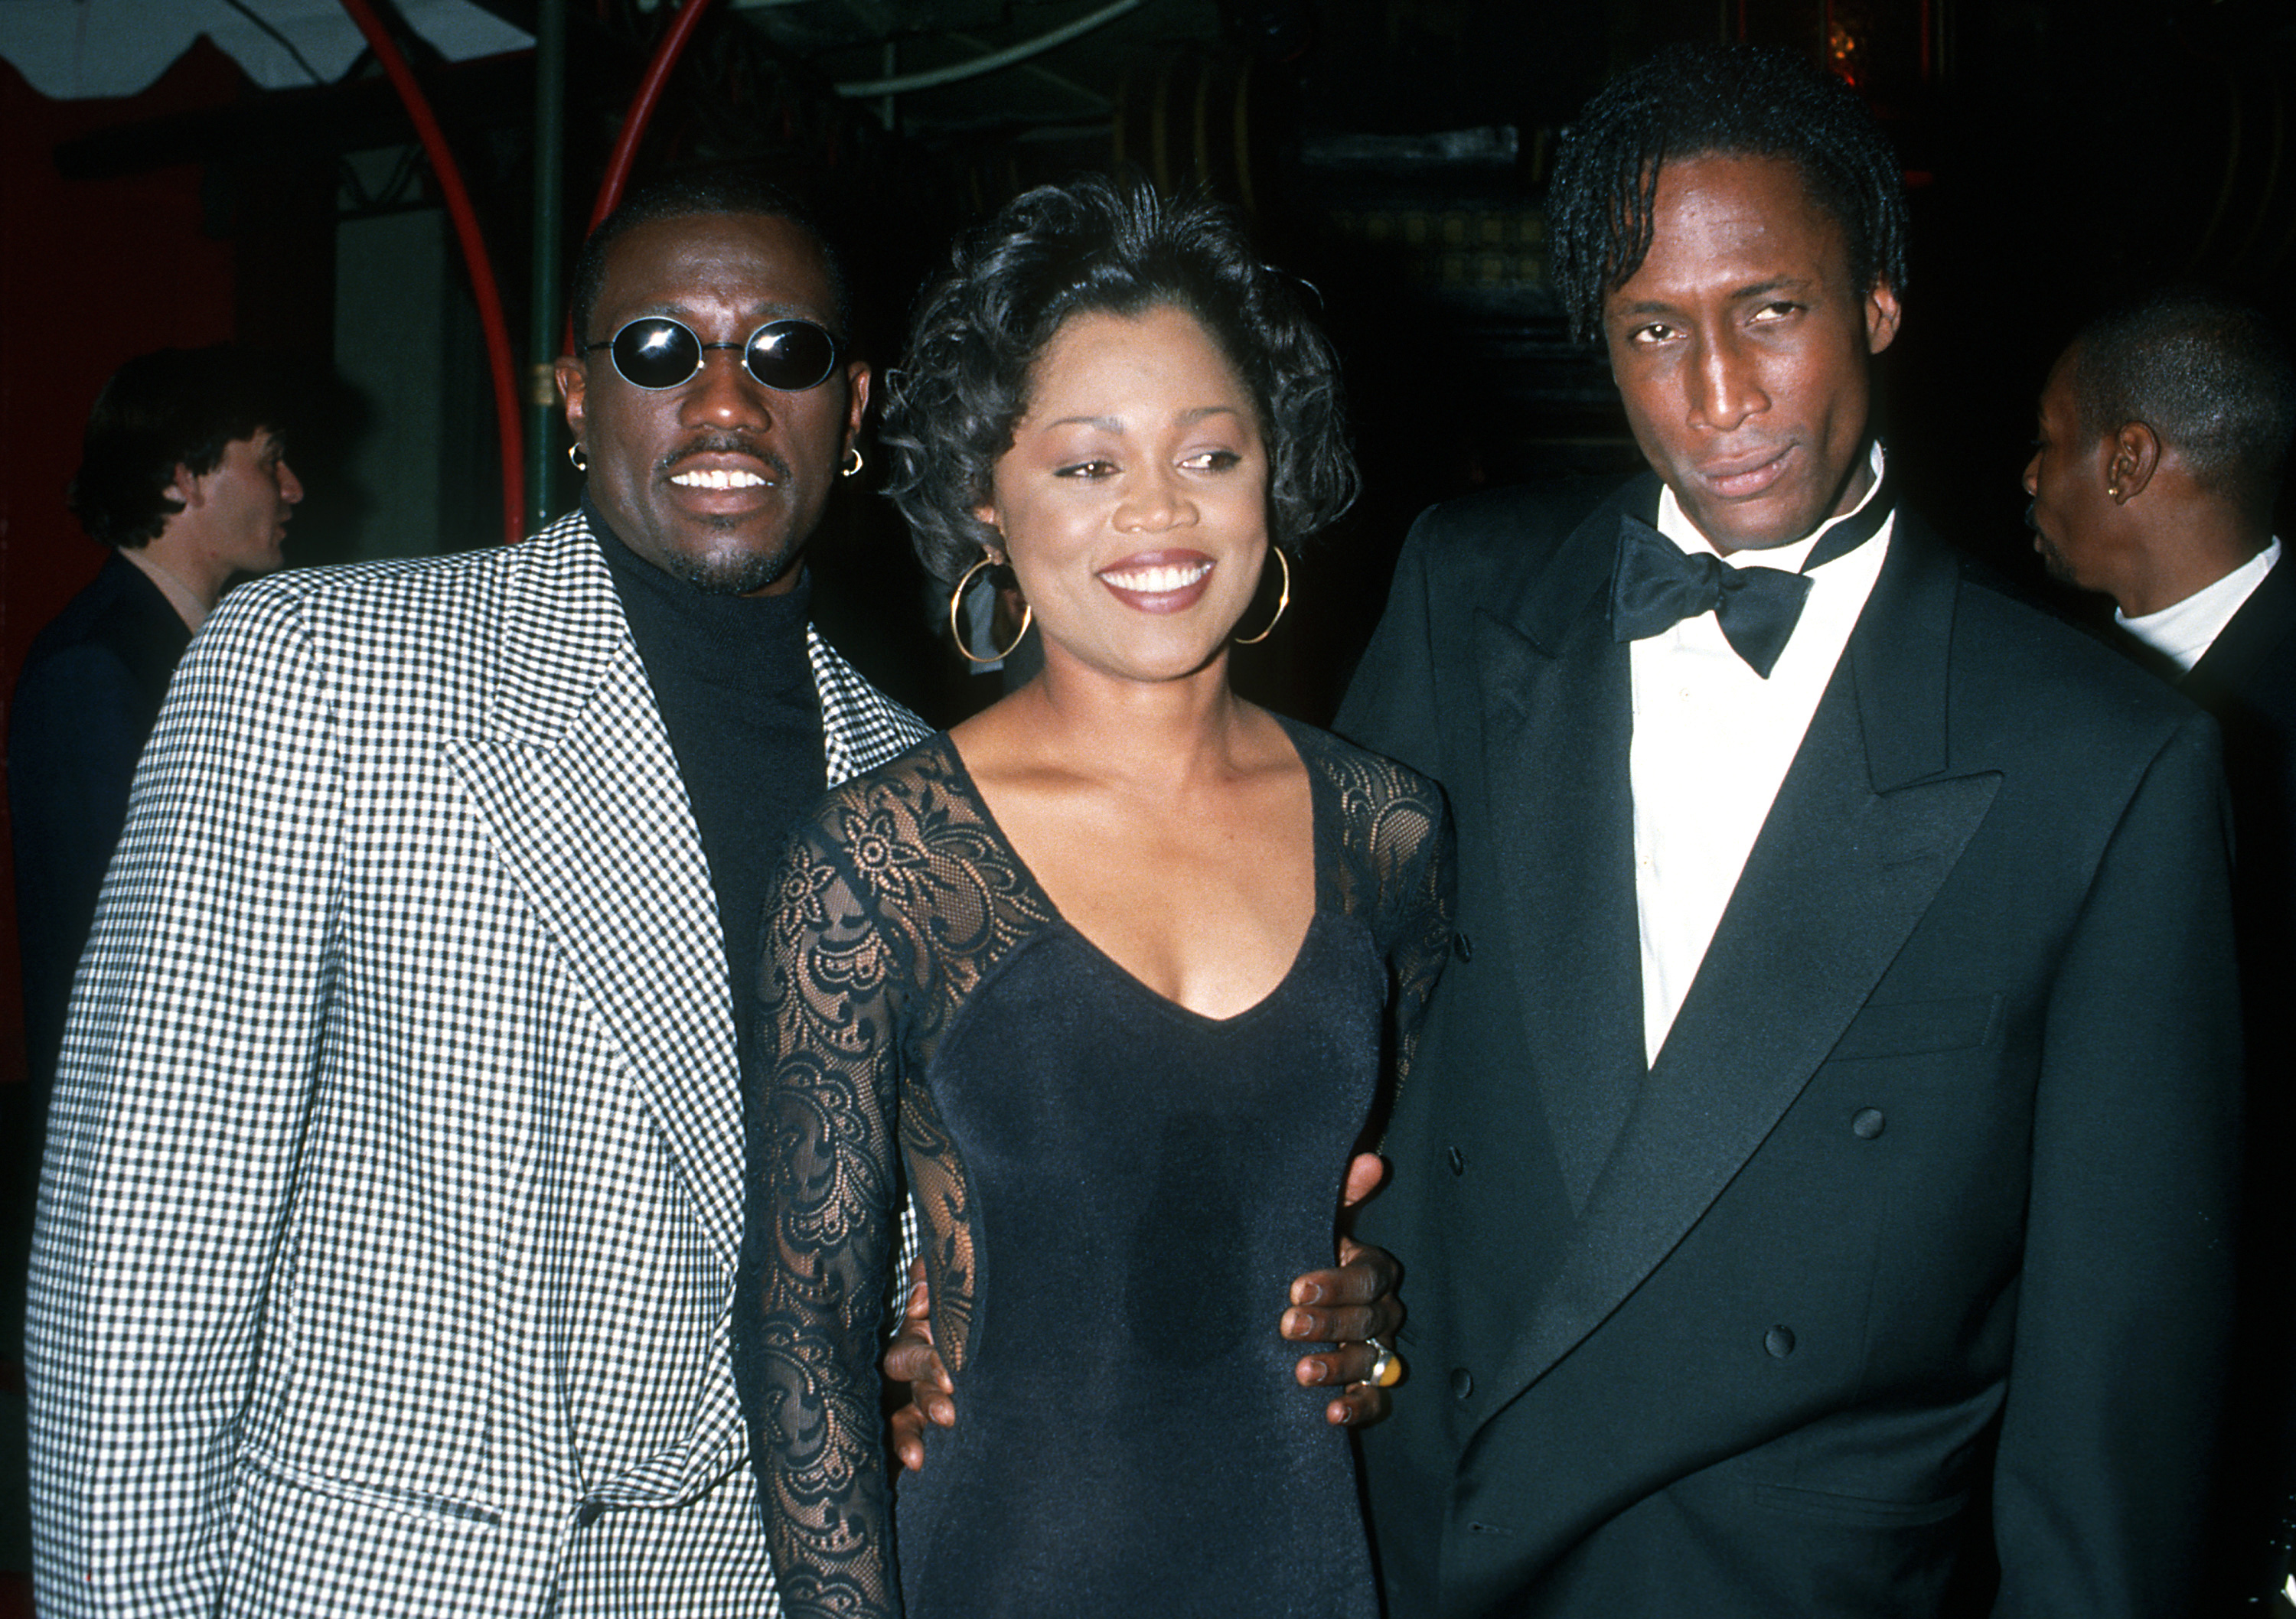 Wesley Snipes, Theresa Randle and Michael Wright during "Sugar Hill" Los Angeles Screening at Mann's Chinese Theater in Hollywood, California | Source: Getty Images